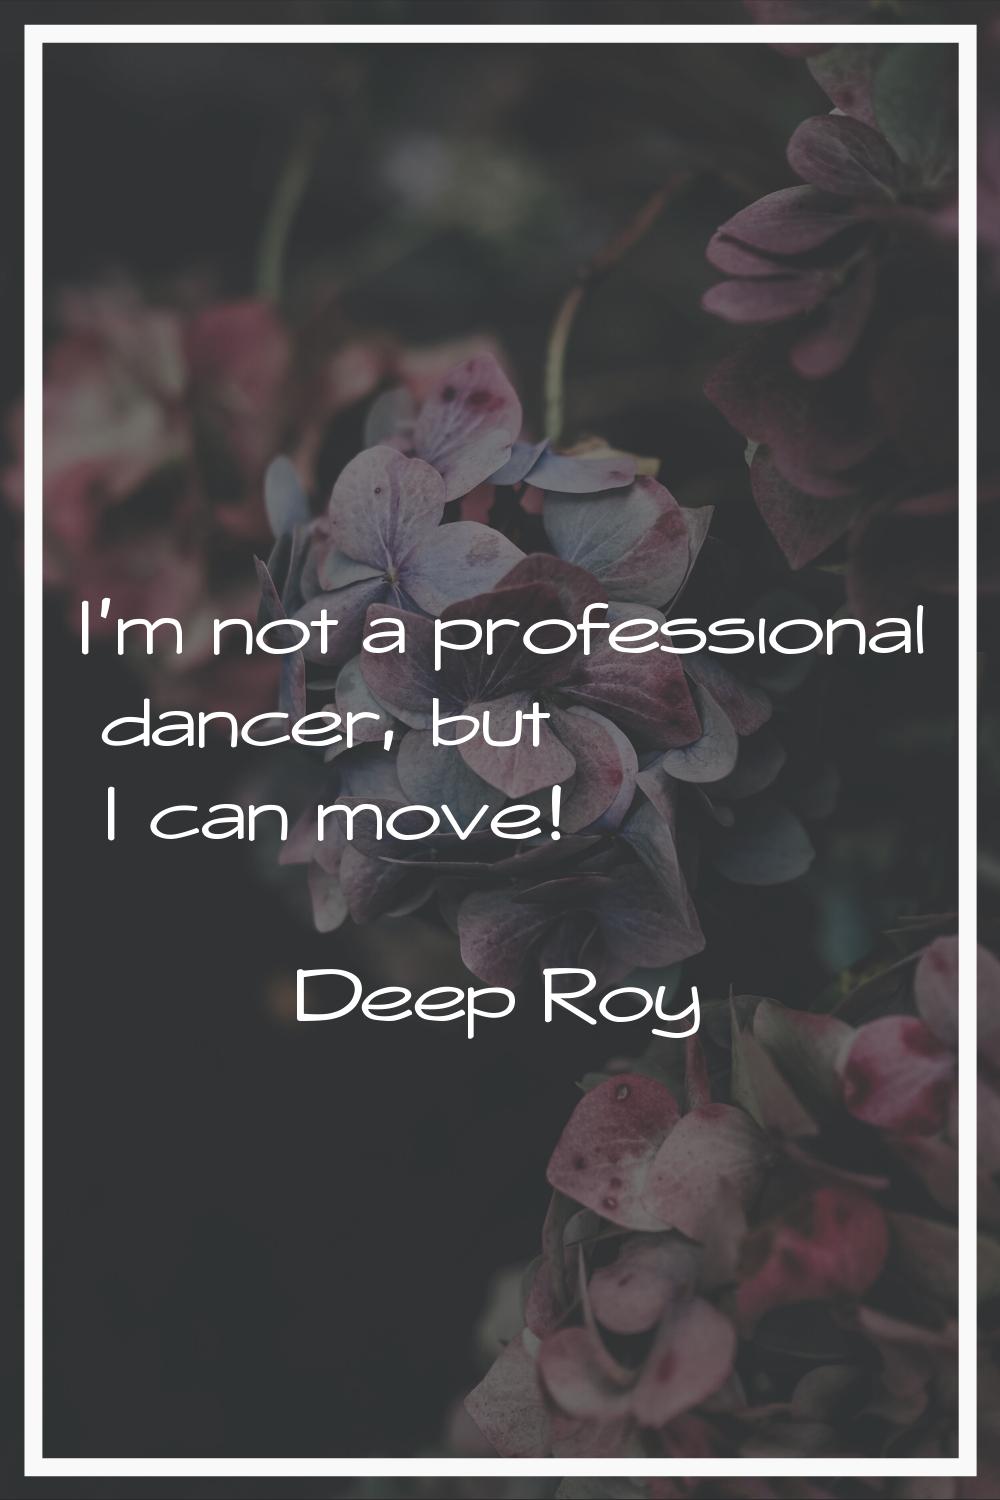 I'm not a professional dancer, but I can move!